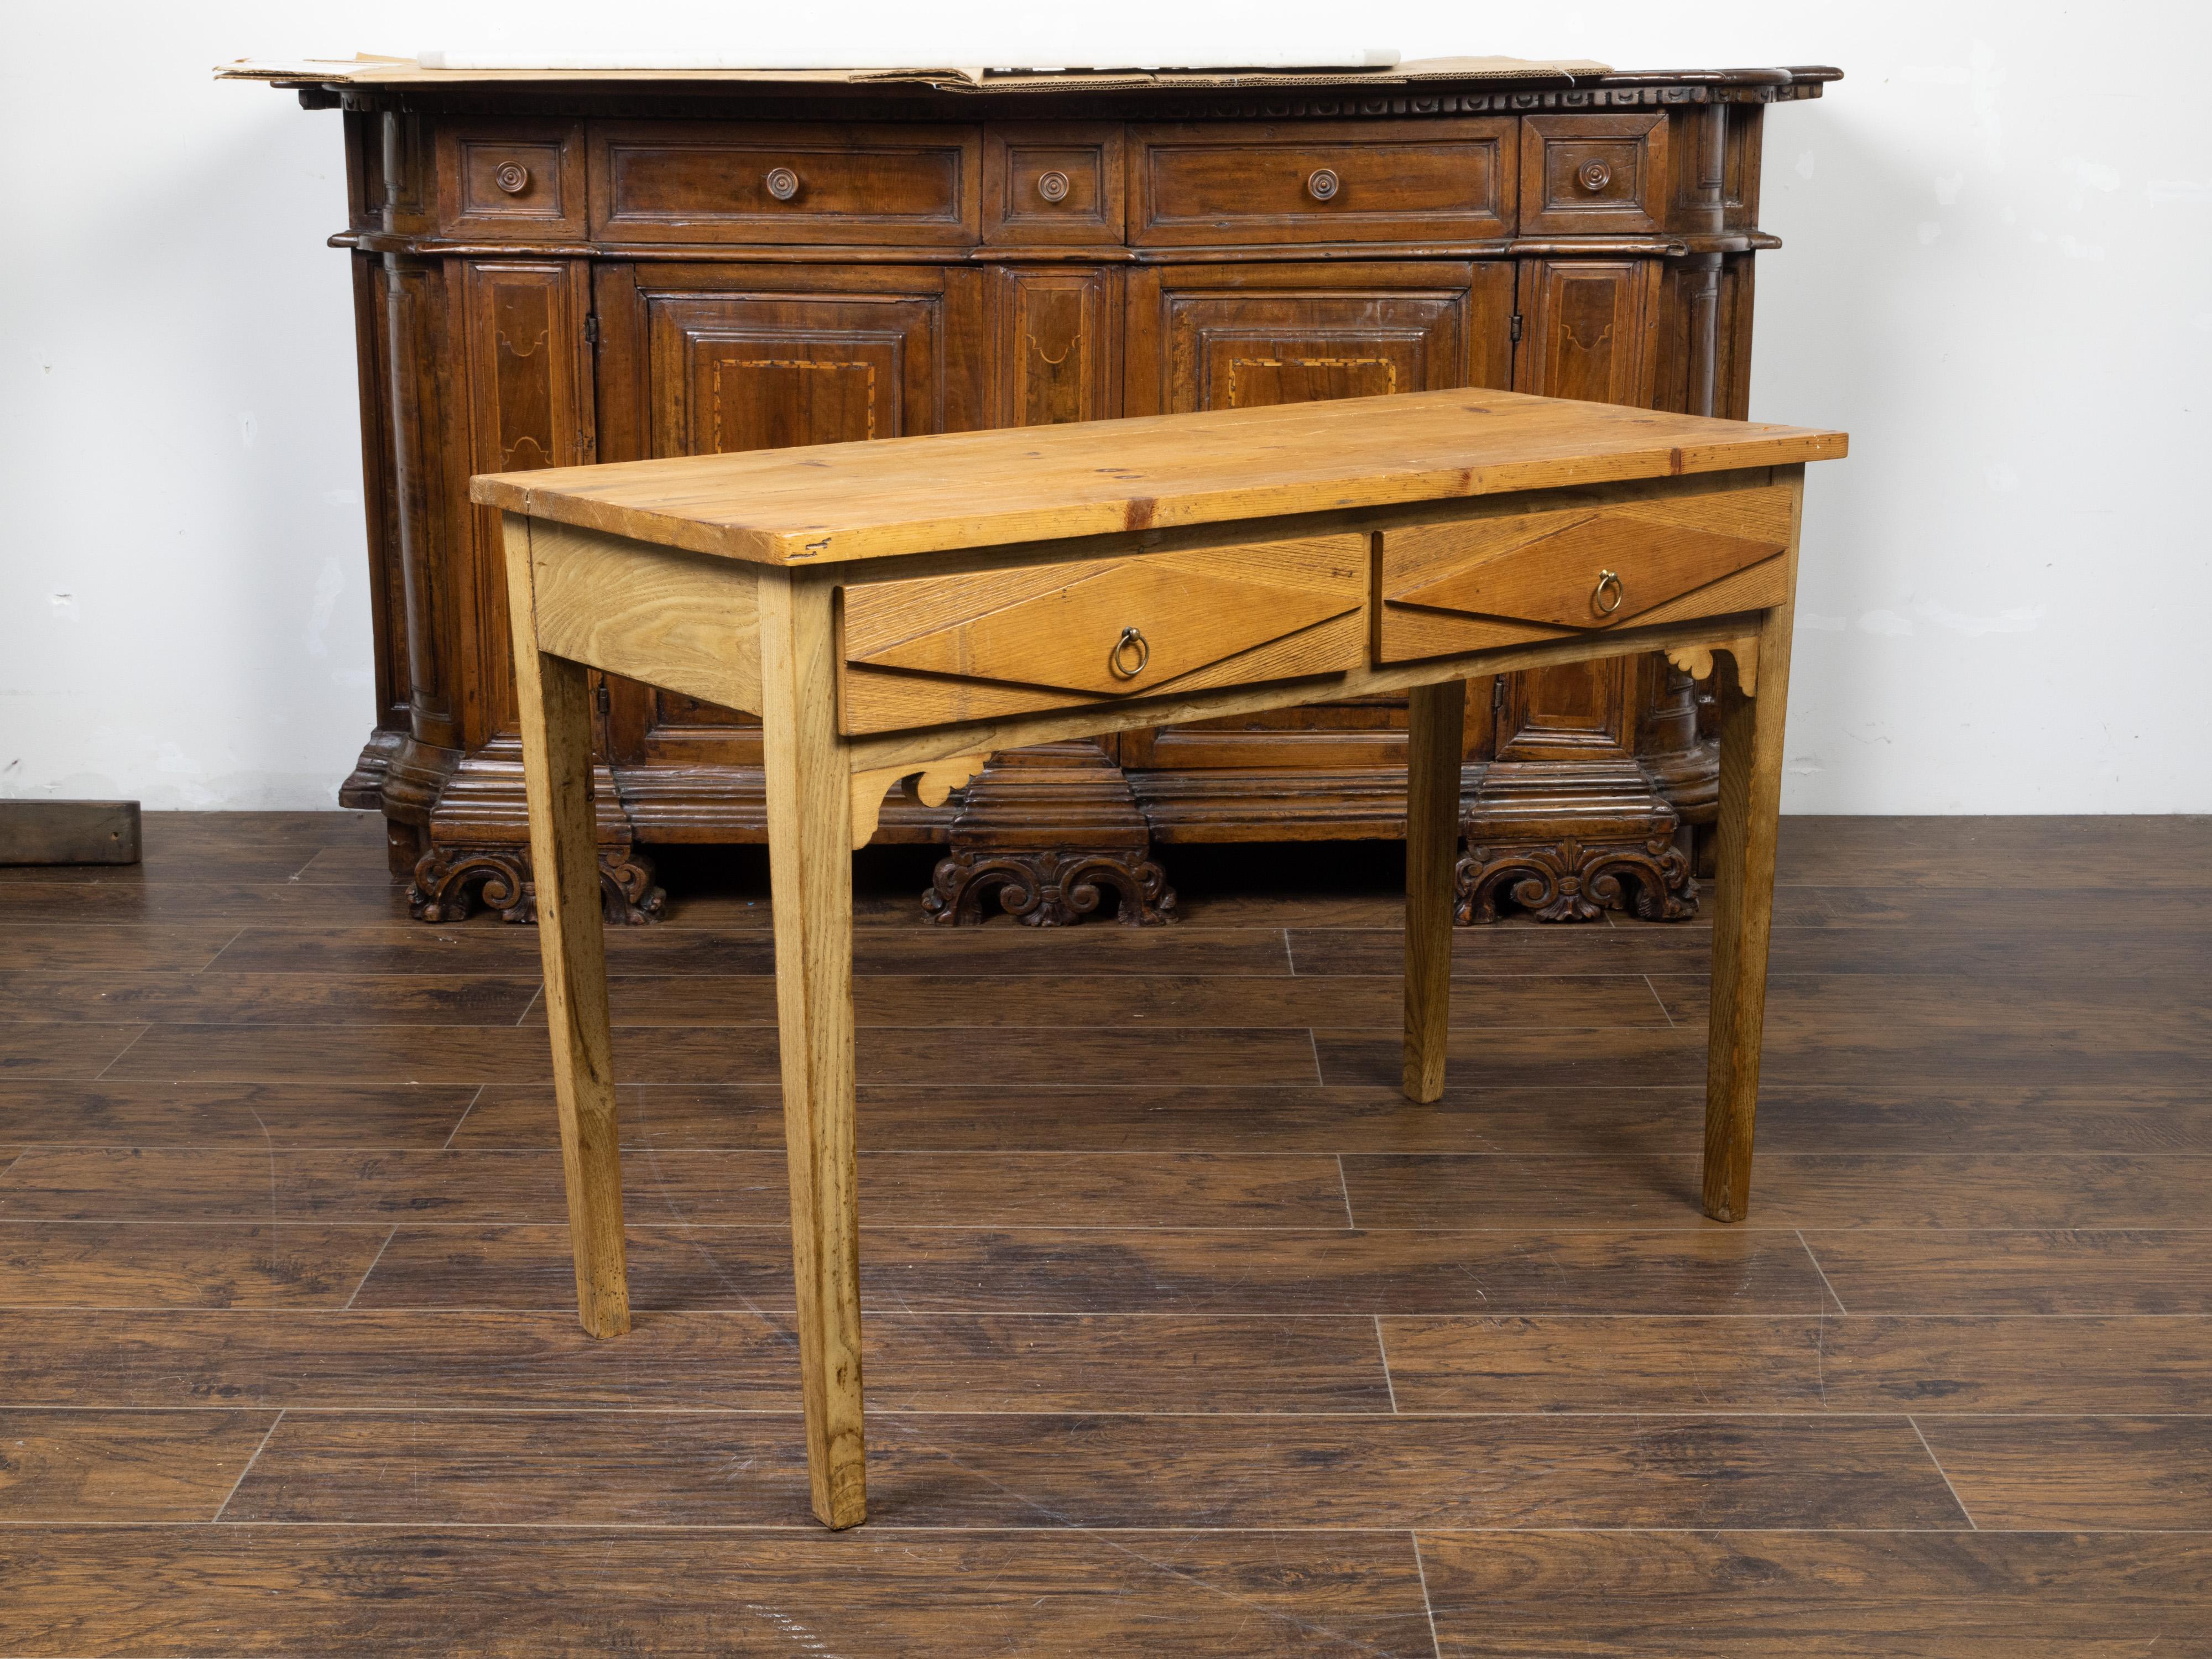 A French pine desk from the 20th century, with two drawers and diamond motifs. Created in France during the 20th century, this pine desk features a rectangular planked top sitting above two drawers each adorned with raised diamond motifs and fitted